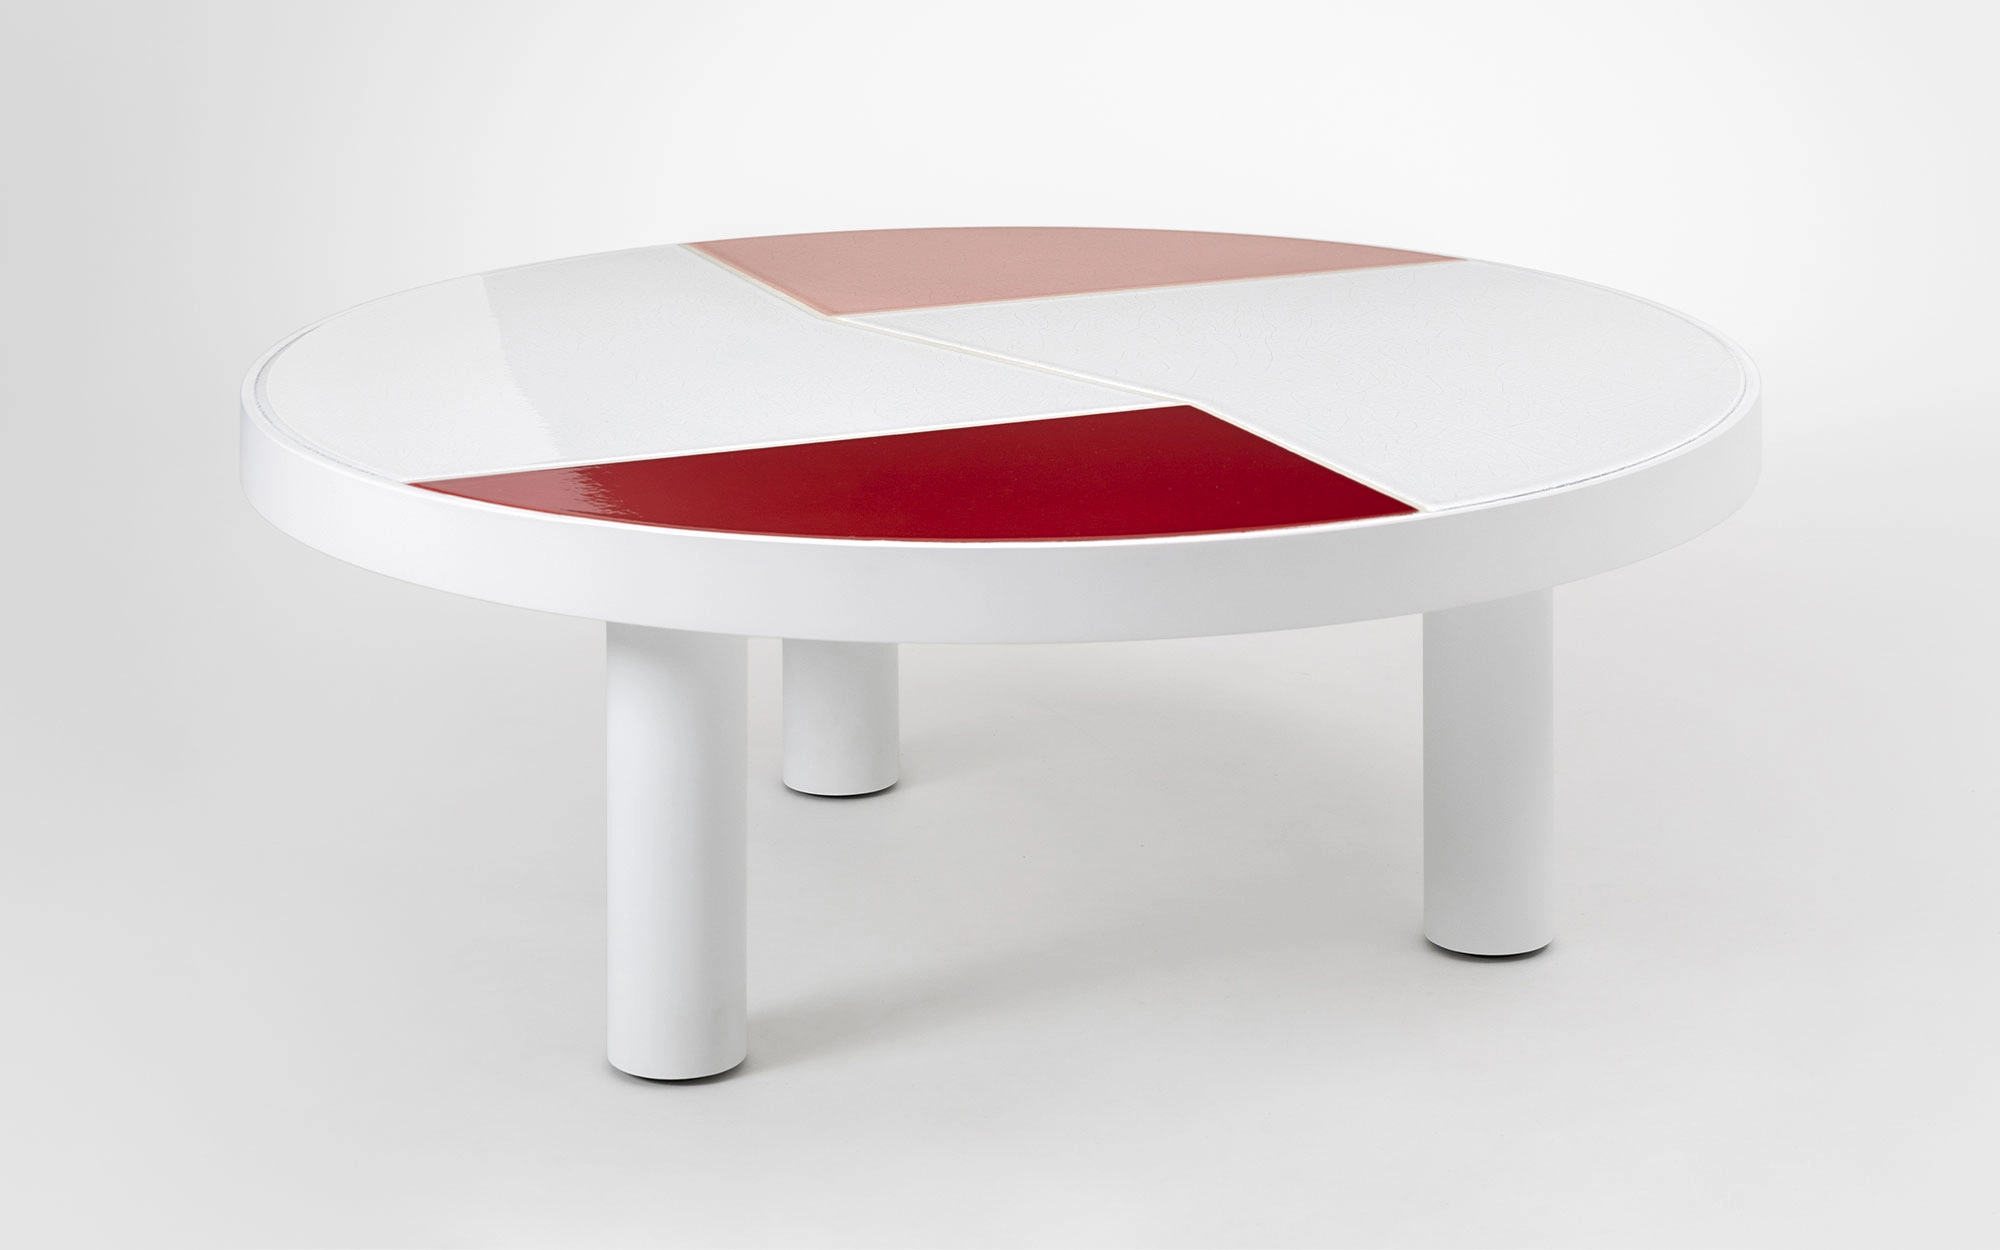 Fraction Coffee Table - Pierre Charpin - Side table - Galerie kreo